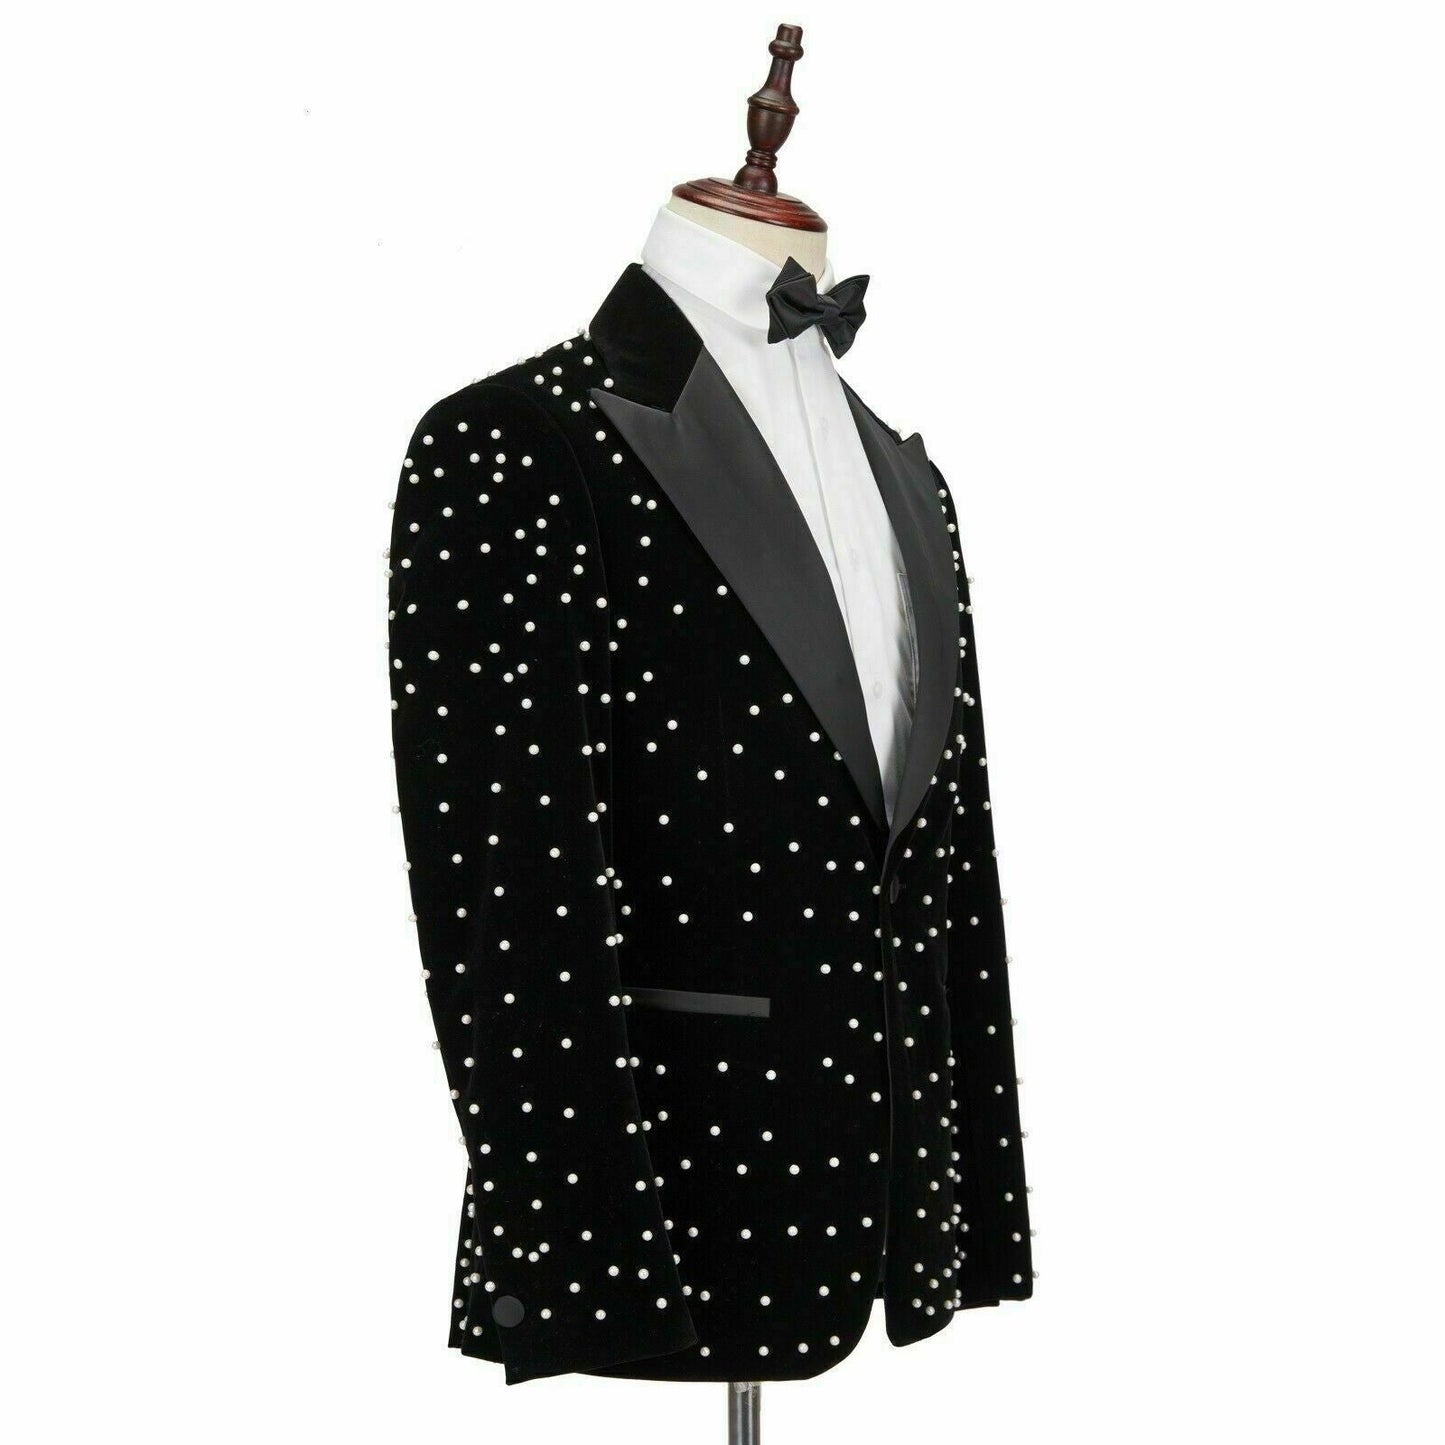 xiangtuibao High Quality Men Suits Black Velvet Crystal Groom Tuxedos Slim Fit Formal Business Party For Wedding Suits Best Man Blazer